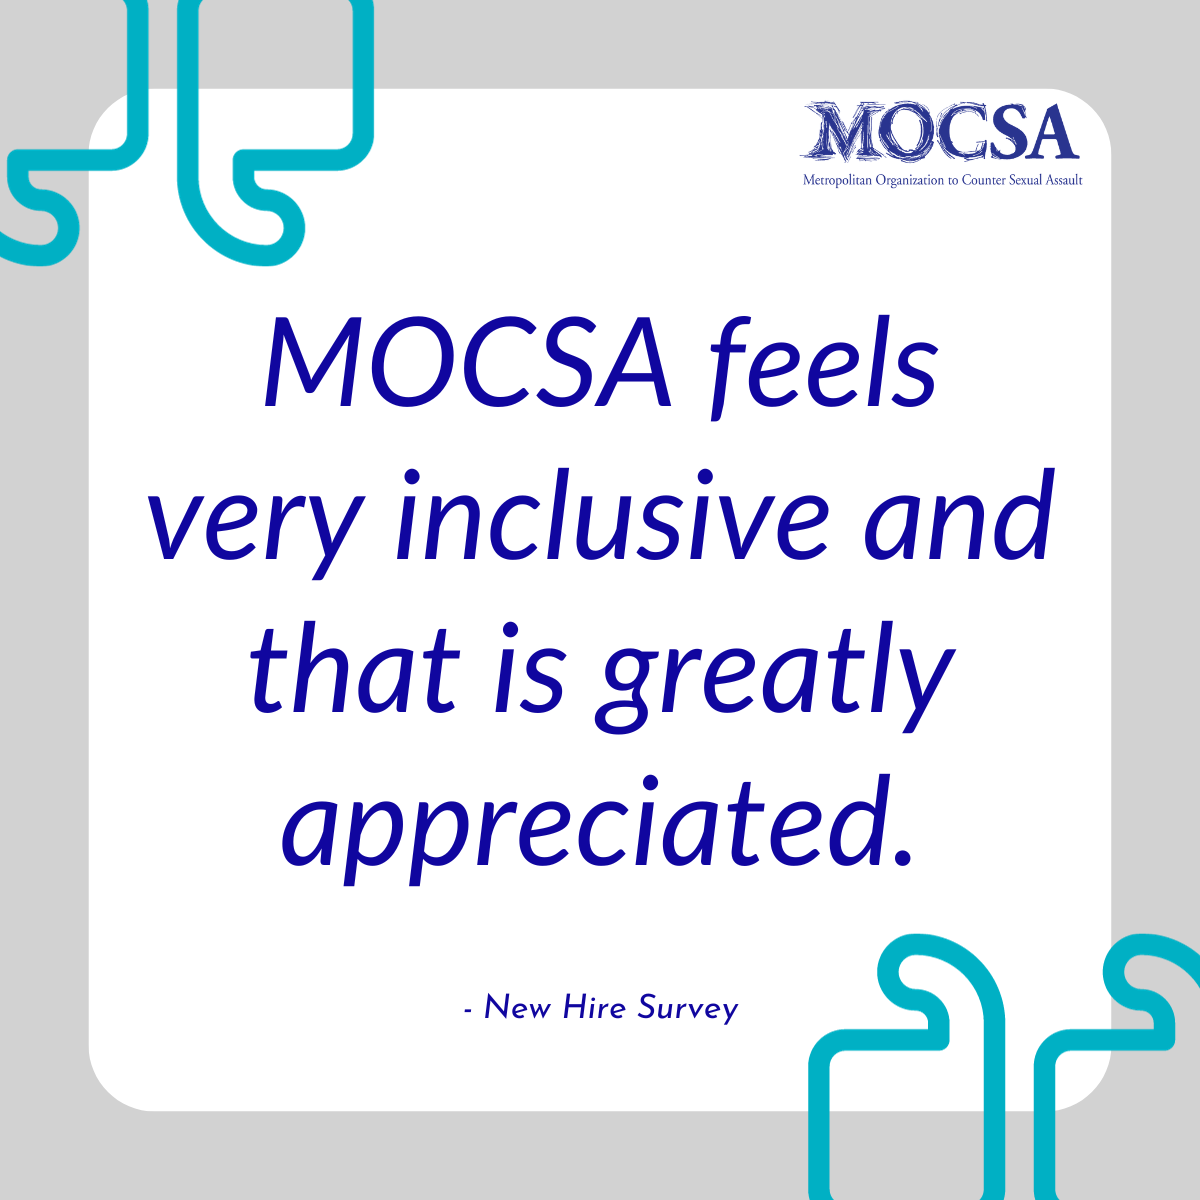 Blue text on white background that reads: MOCSA feels very inclusive and that is greatly appreciated.